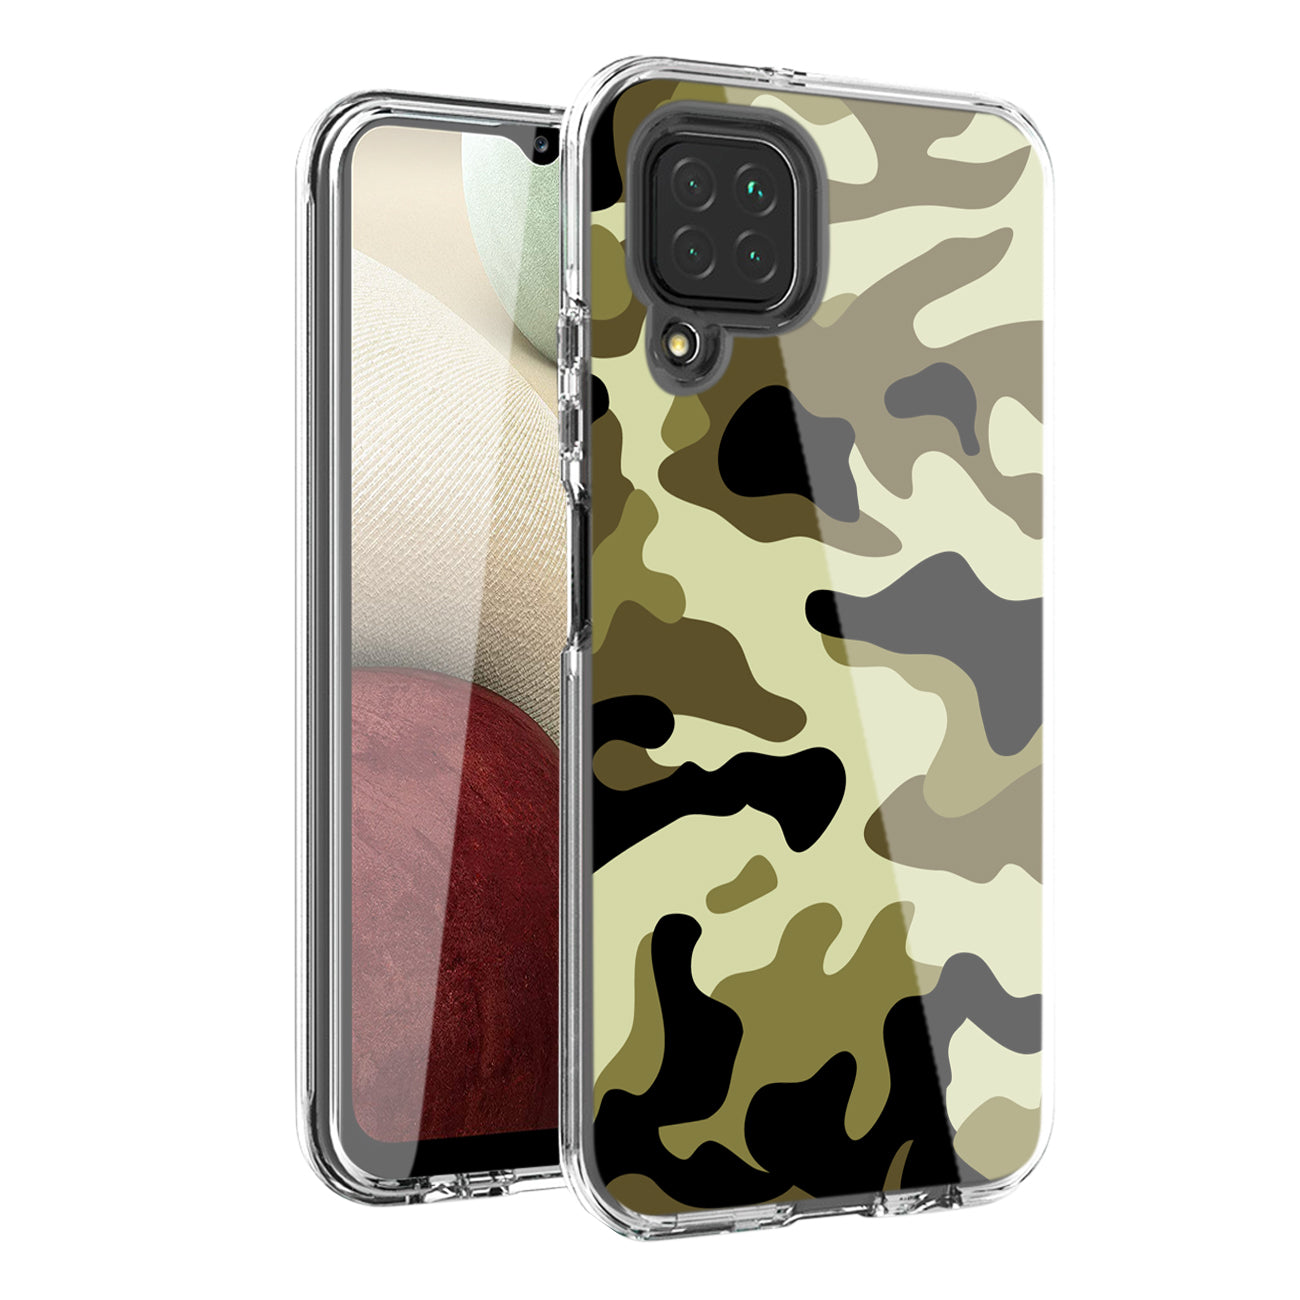 Camouflage Dual Layer Hybrid Hard & Soft TPU Rubber Case for SAMS GALAXY A12 5G In Green